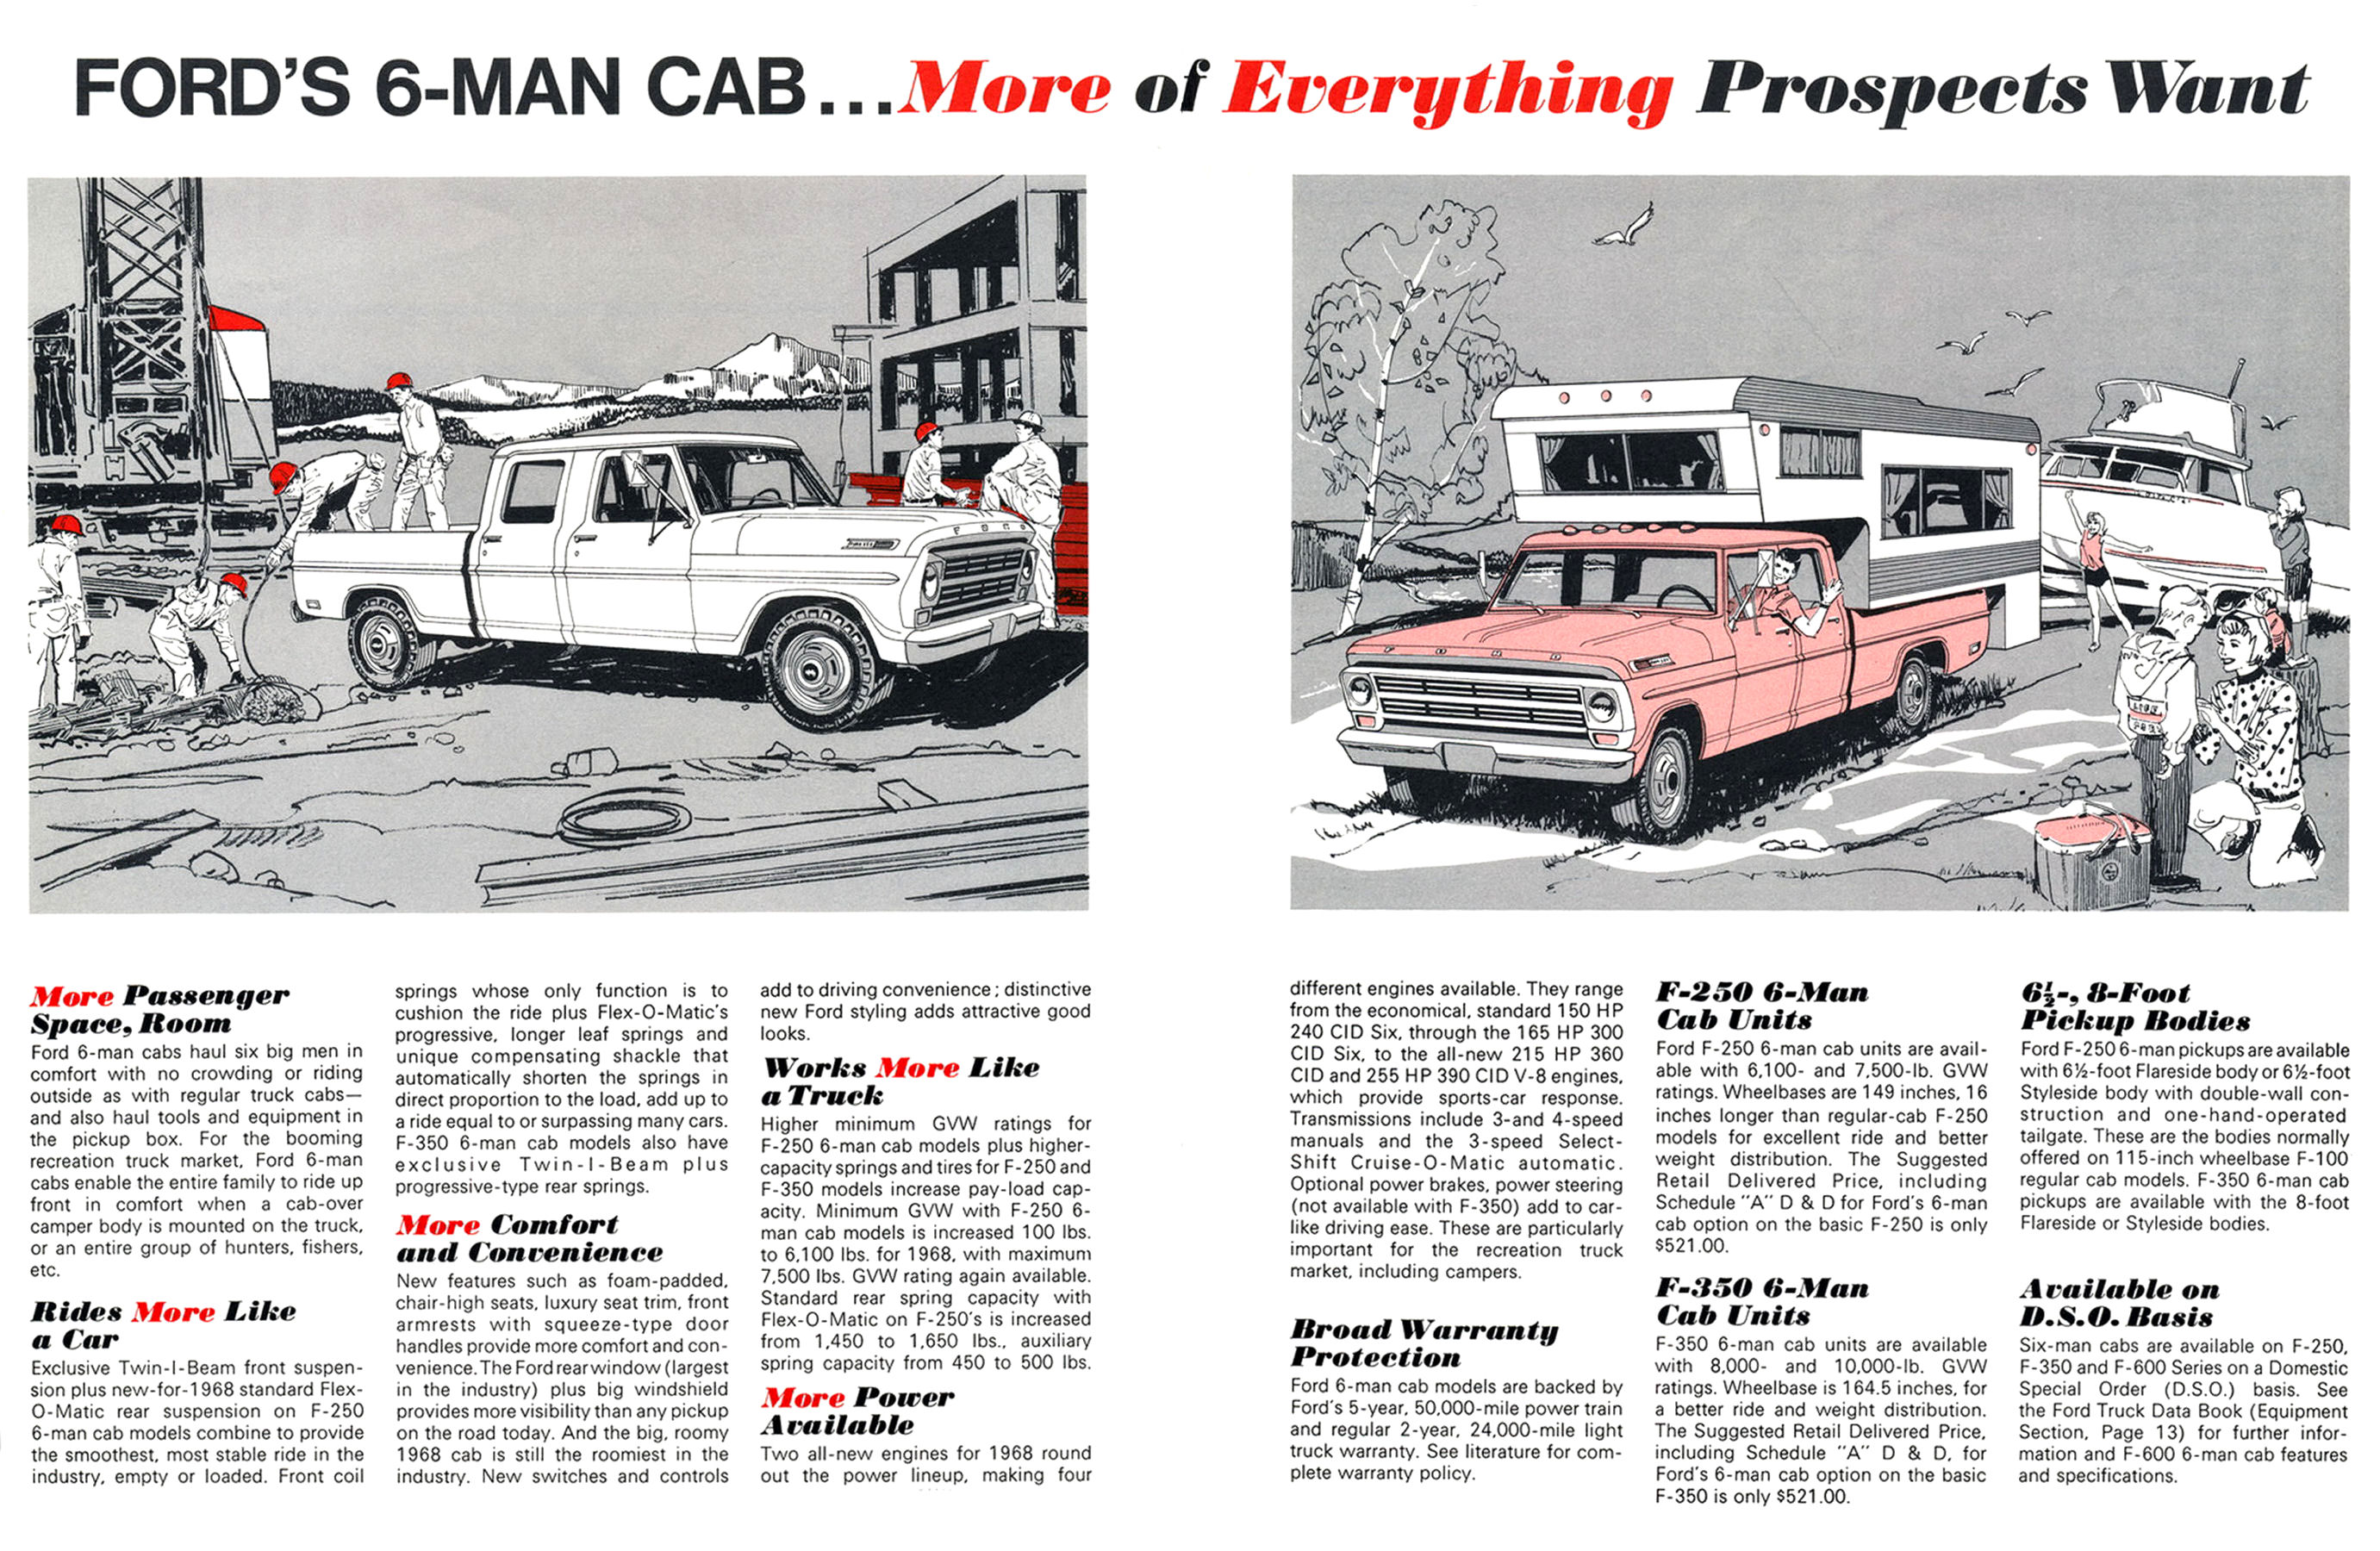 1968 Ford Crew Cab Sales Features-02-03